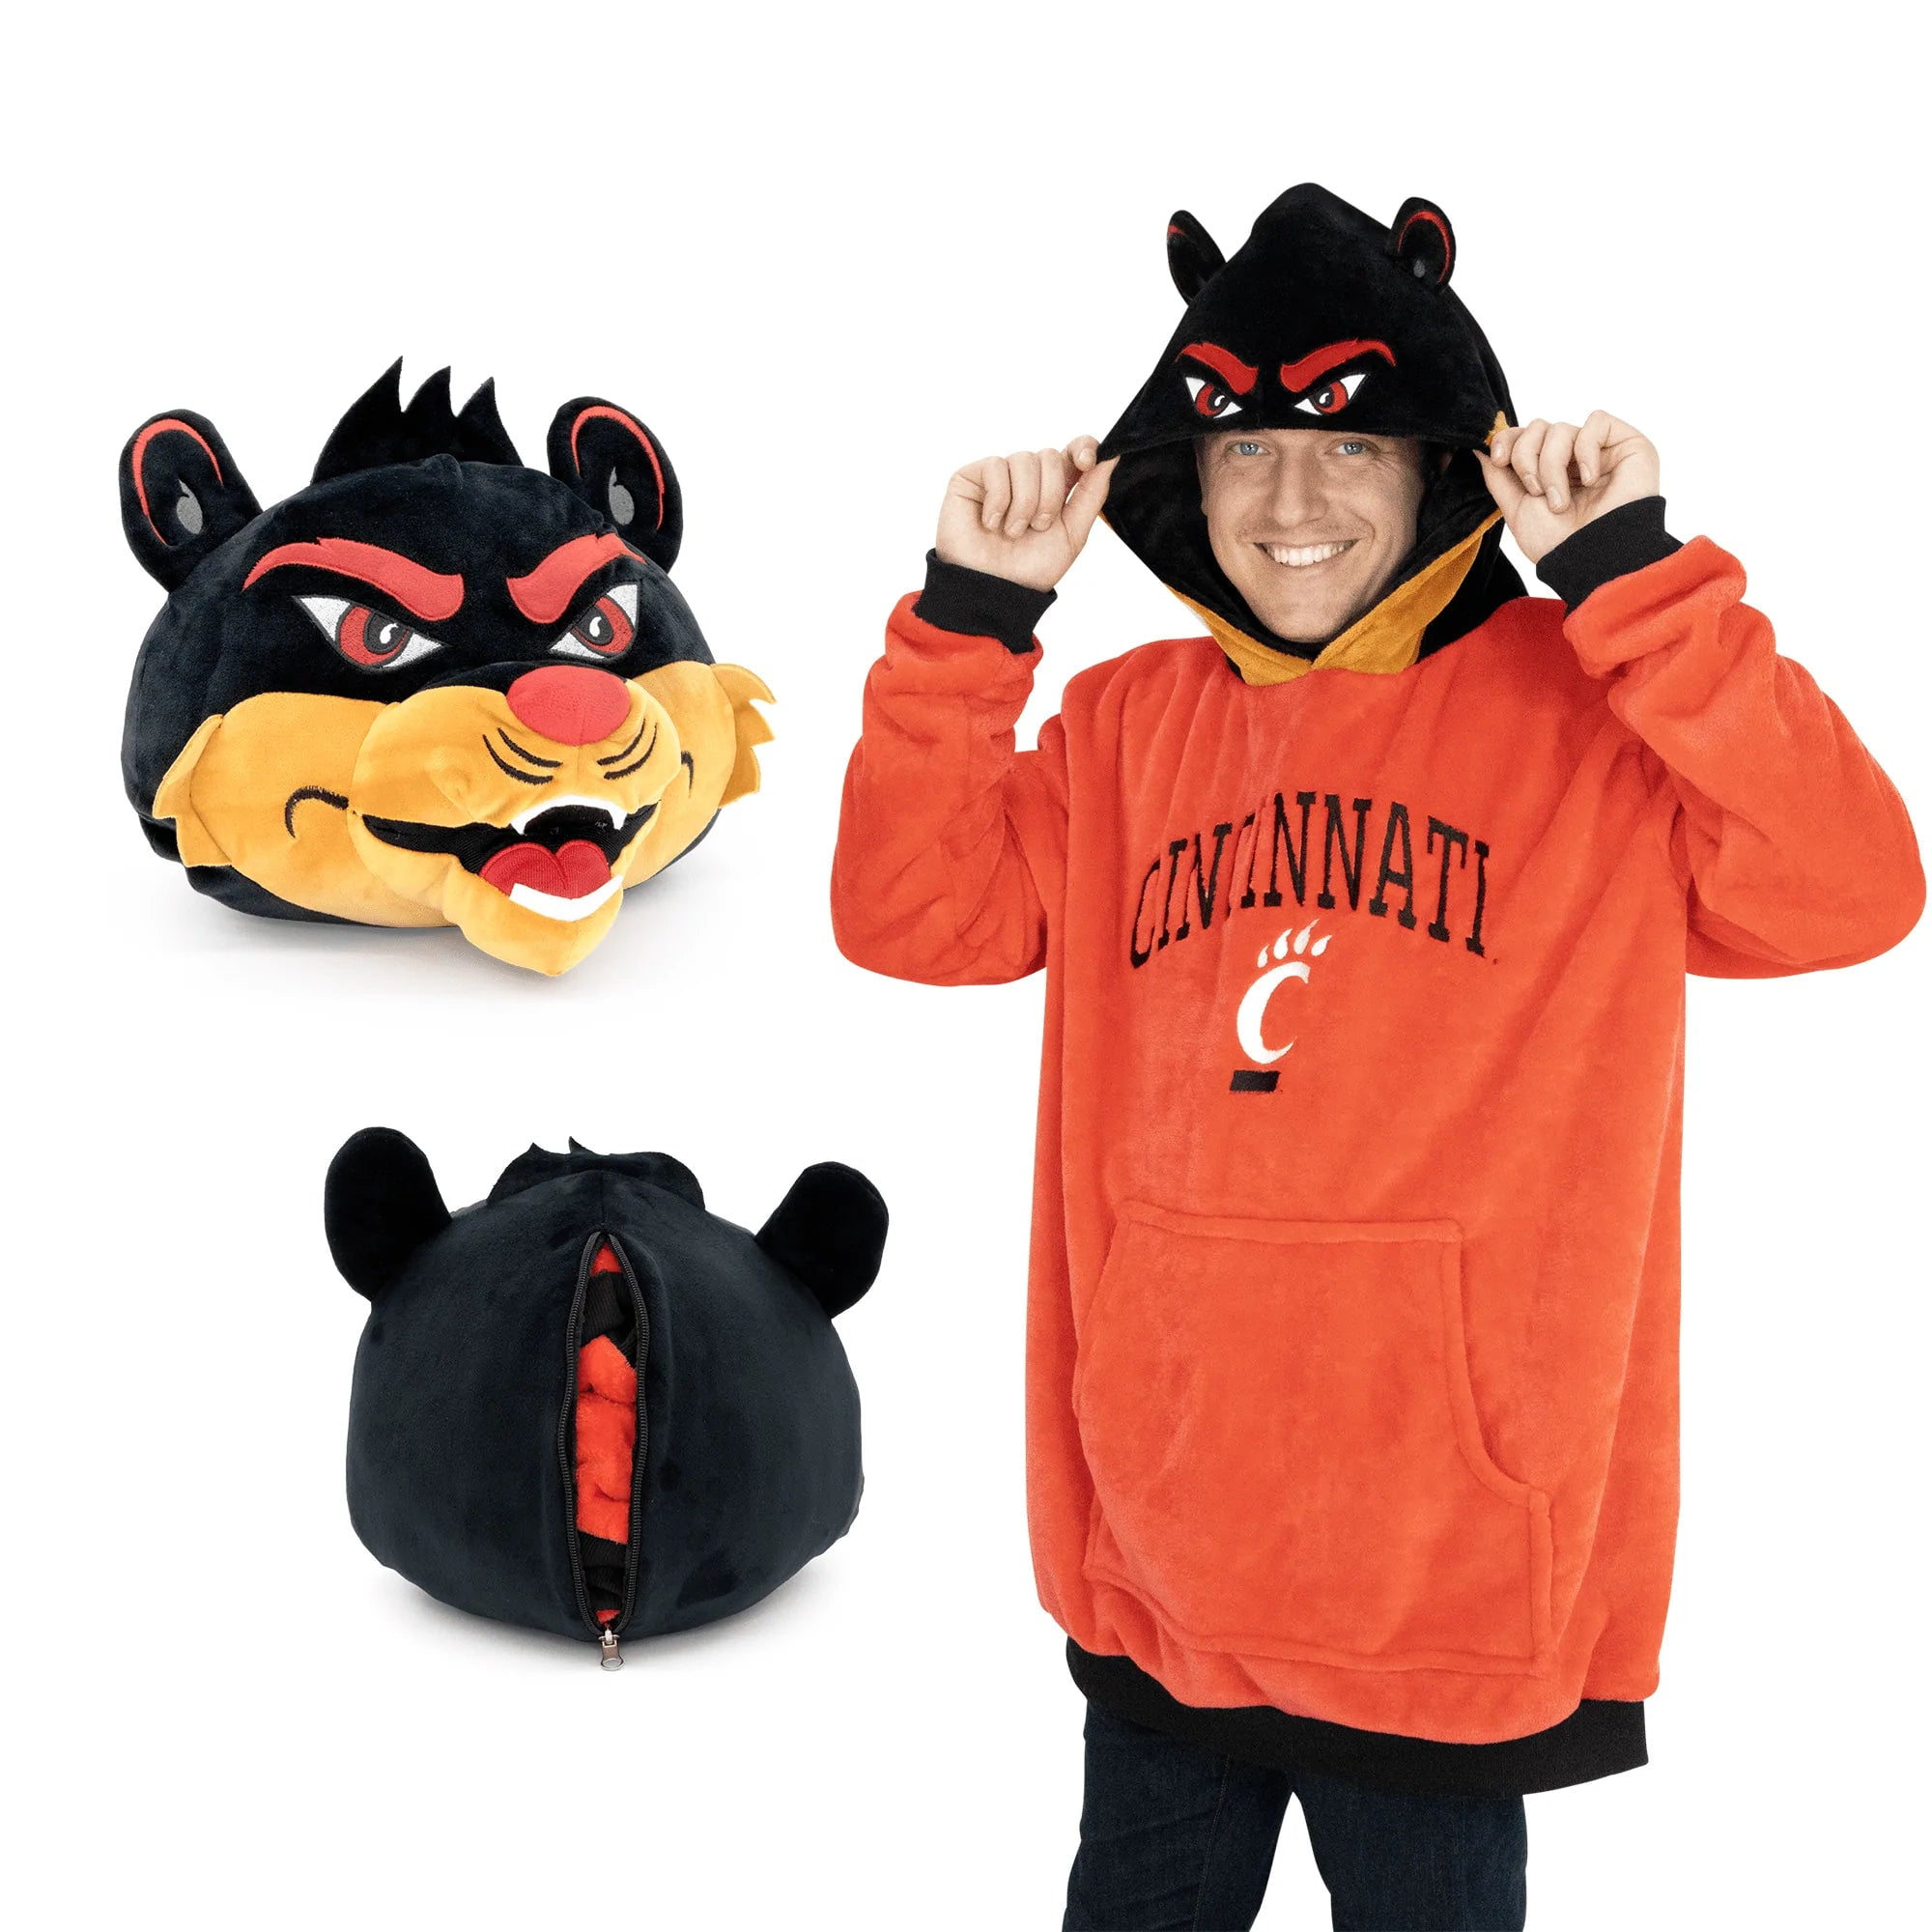  University of Louisville Official Mascot Unisex Adult  Pull-Over Hoodie : Sports & Outdoors